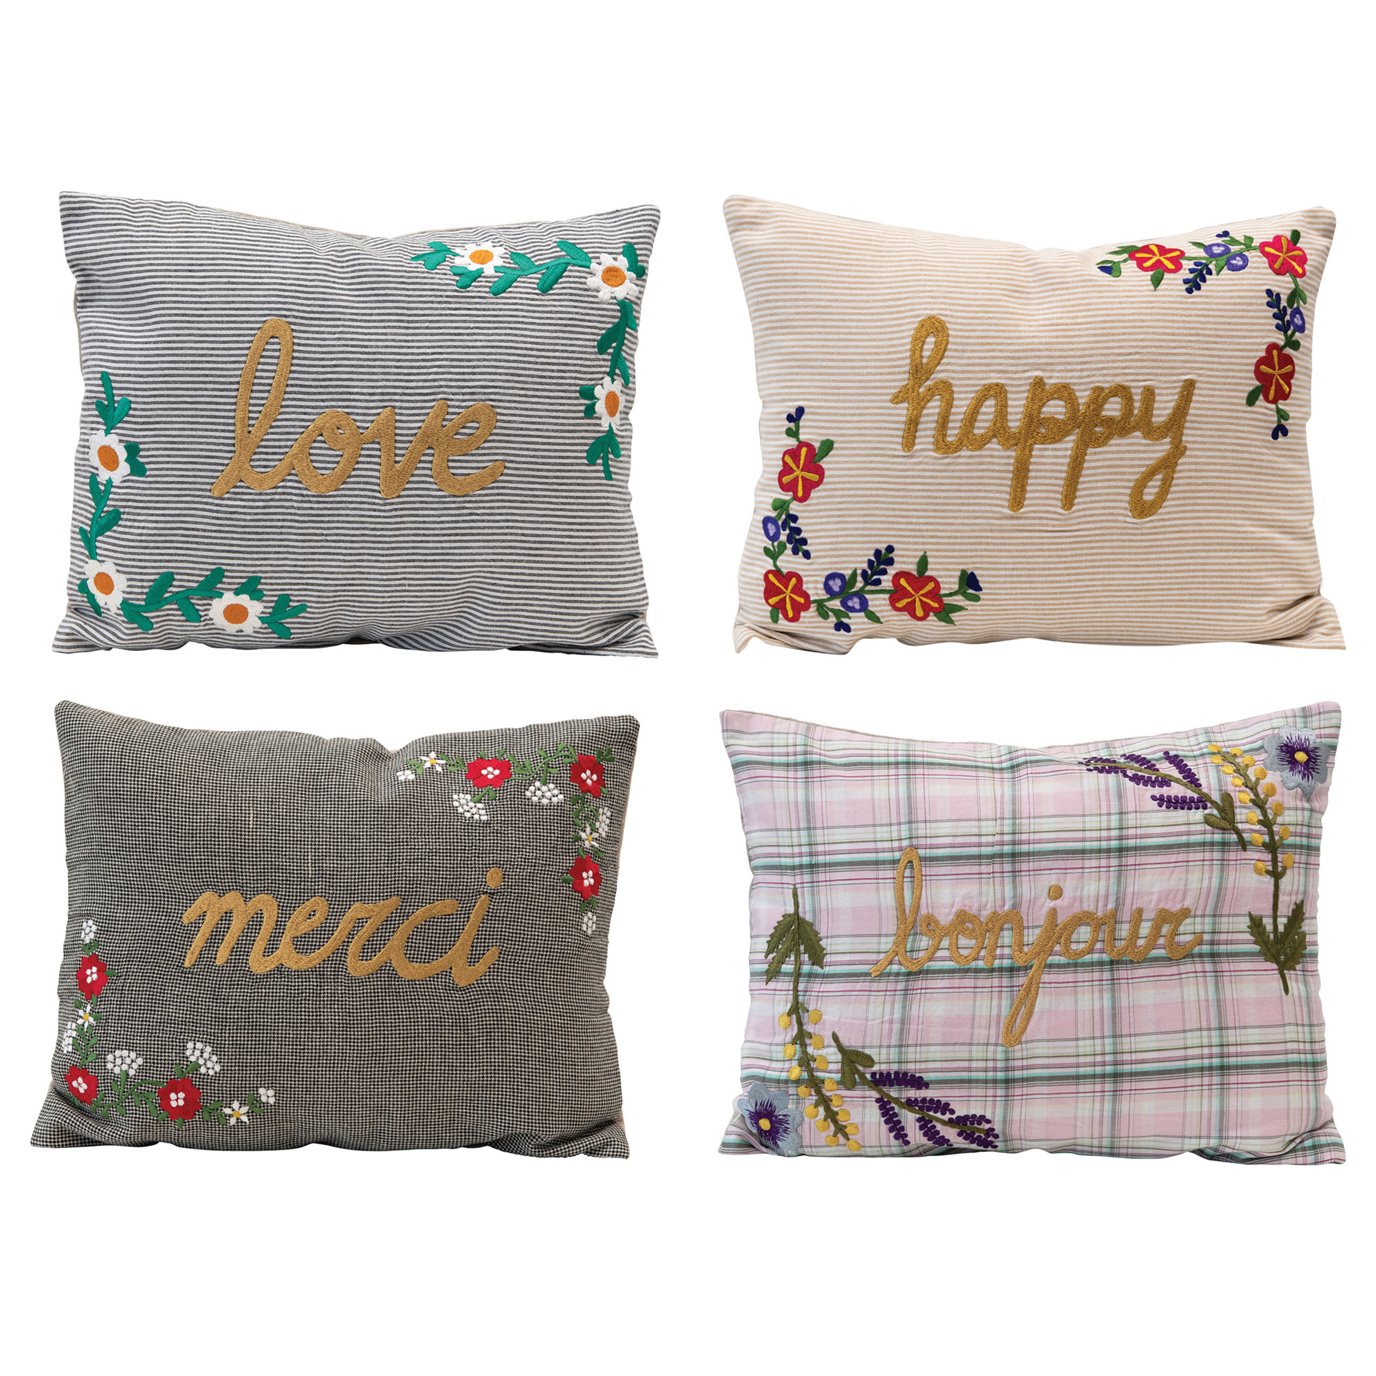 Cotton Embroidered Lumbar Pillow w/ Florals & Metallic Words, 4 Styles